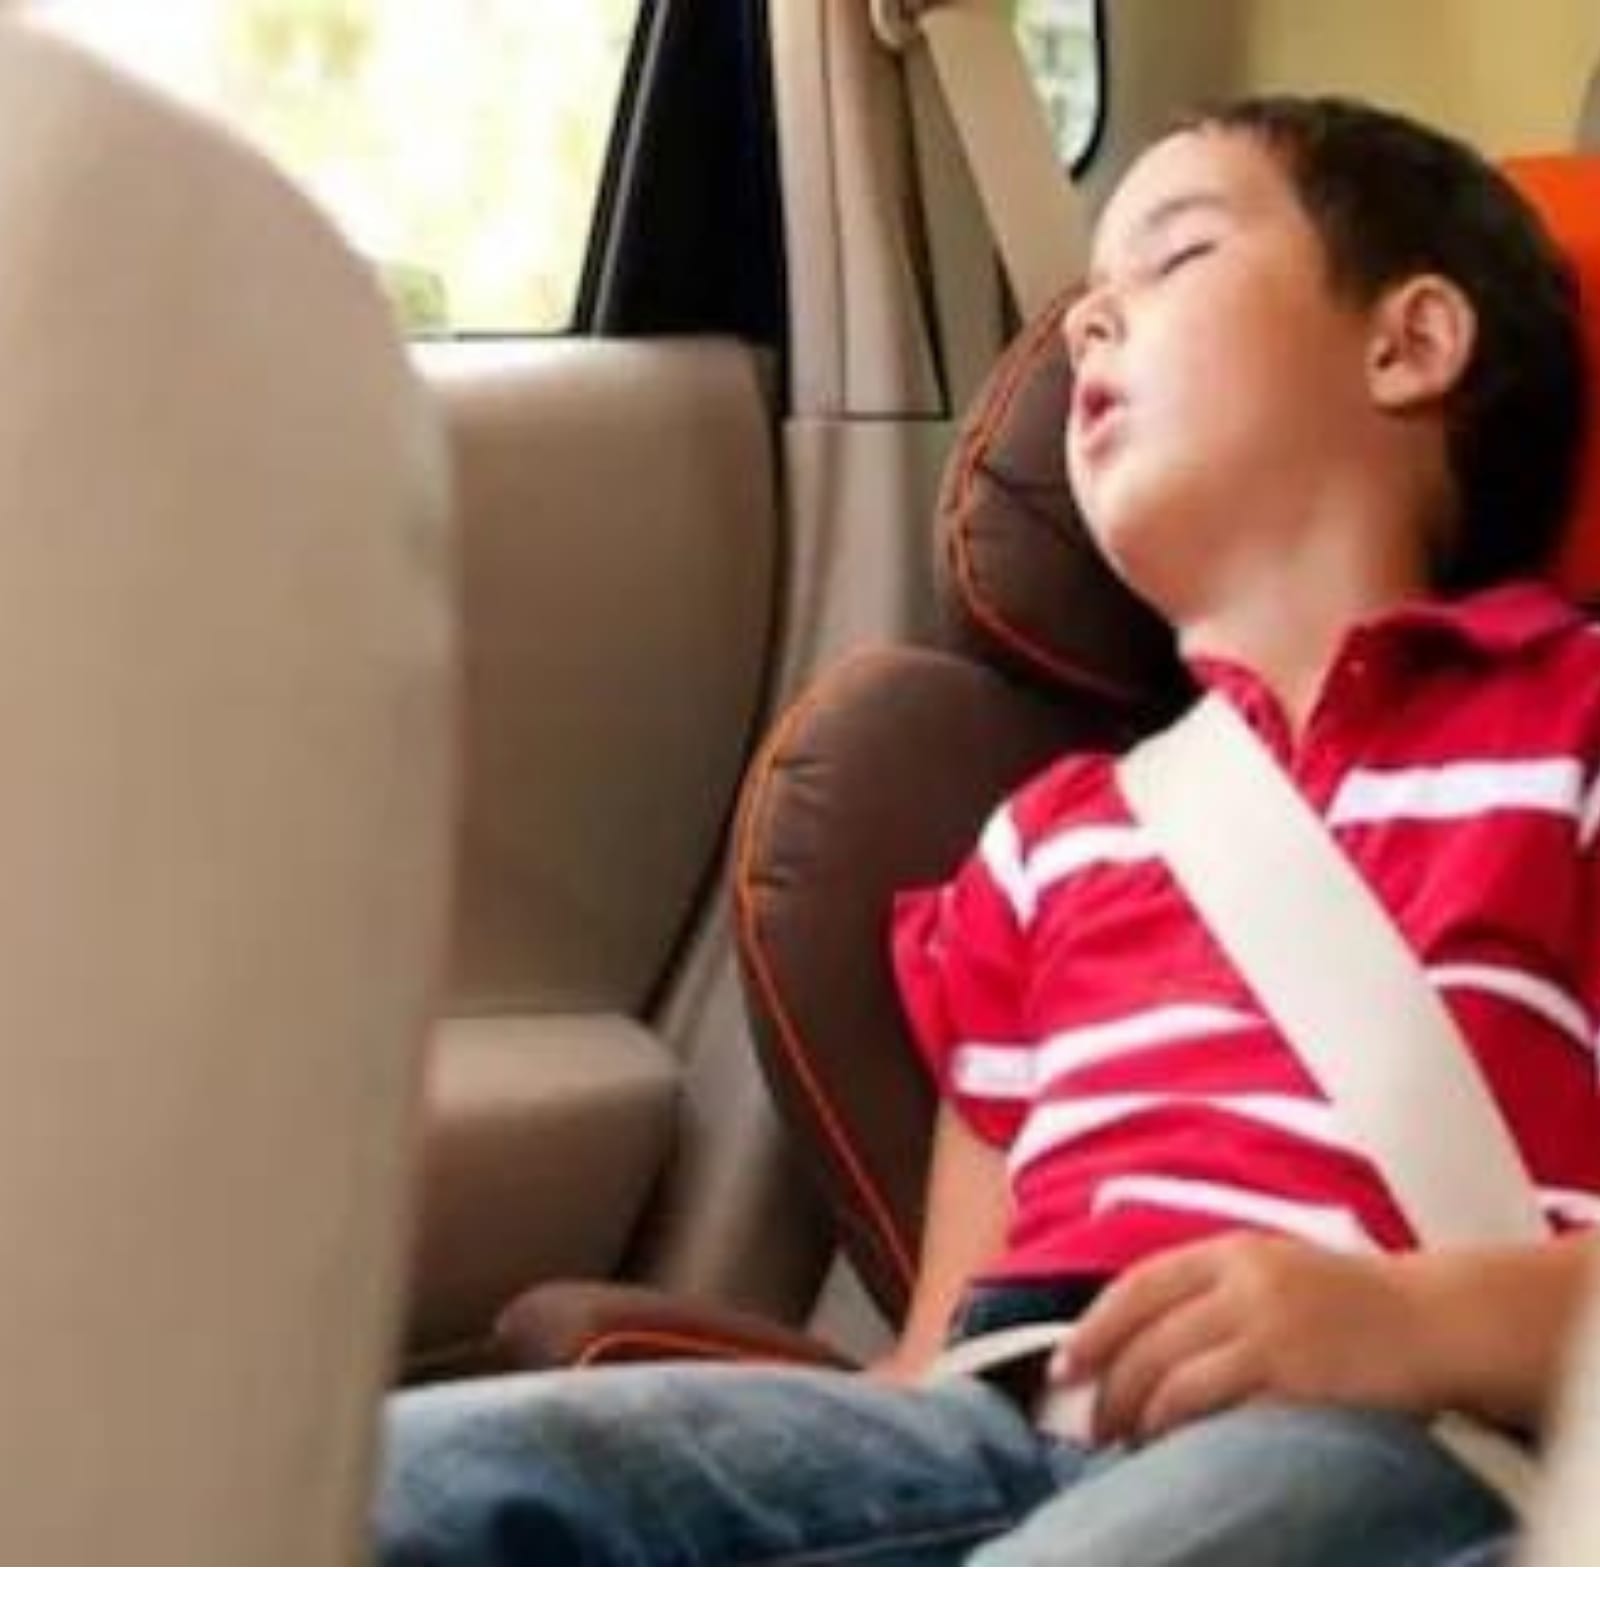 Why People Sleep While Travelling In Cars - News18